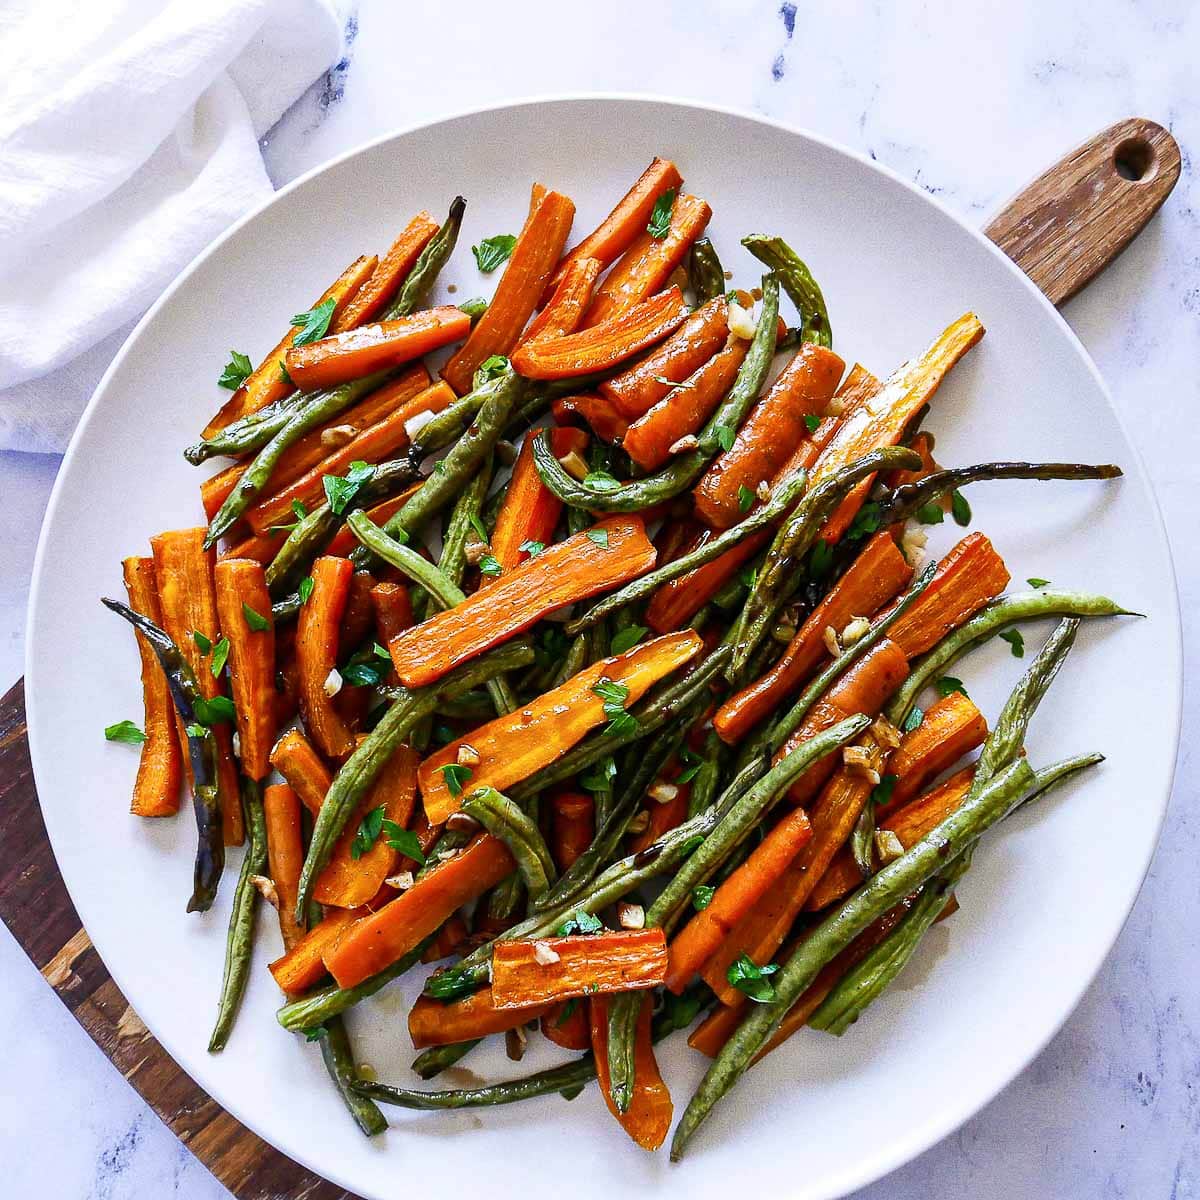 Roasted sliced carrots and roasted green beans on a large round white plate on top of a wooden board.